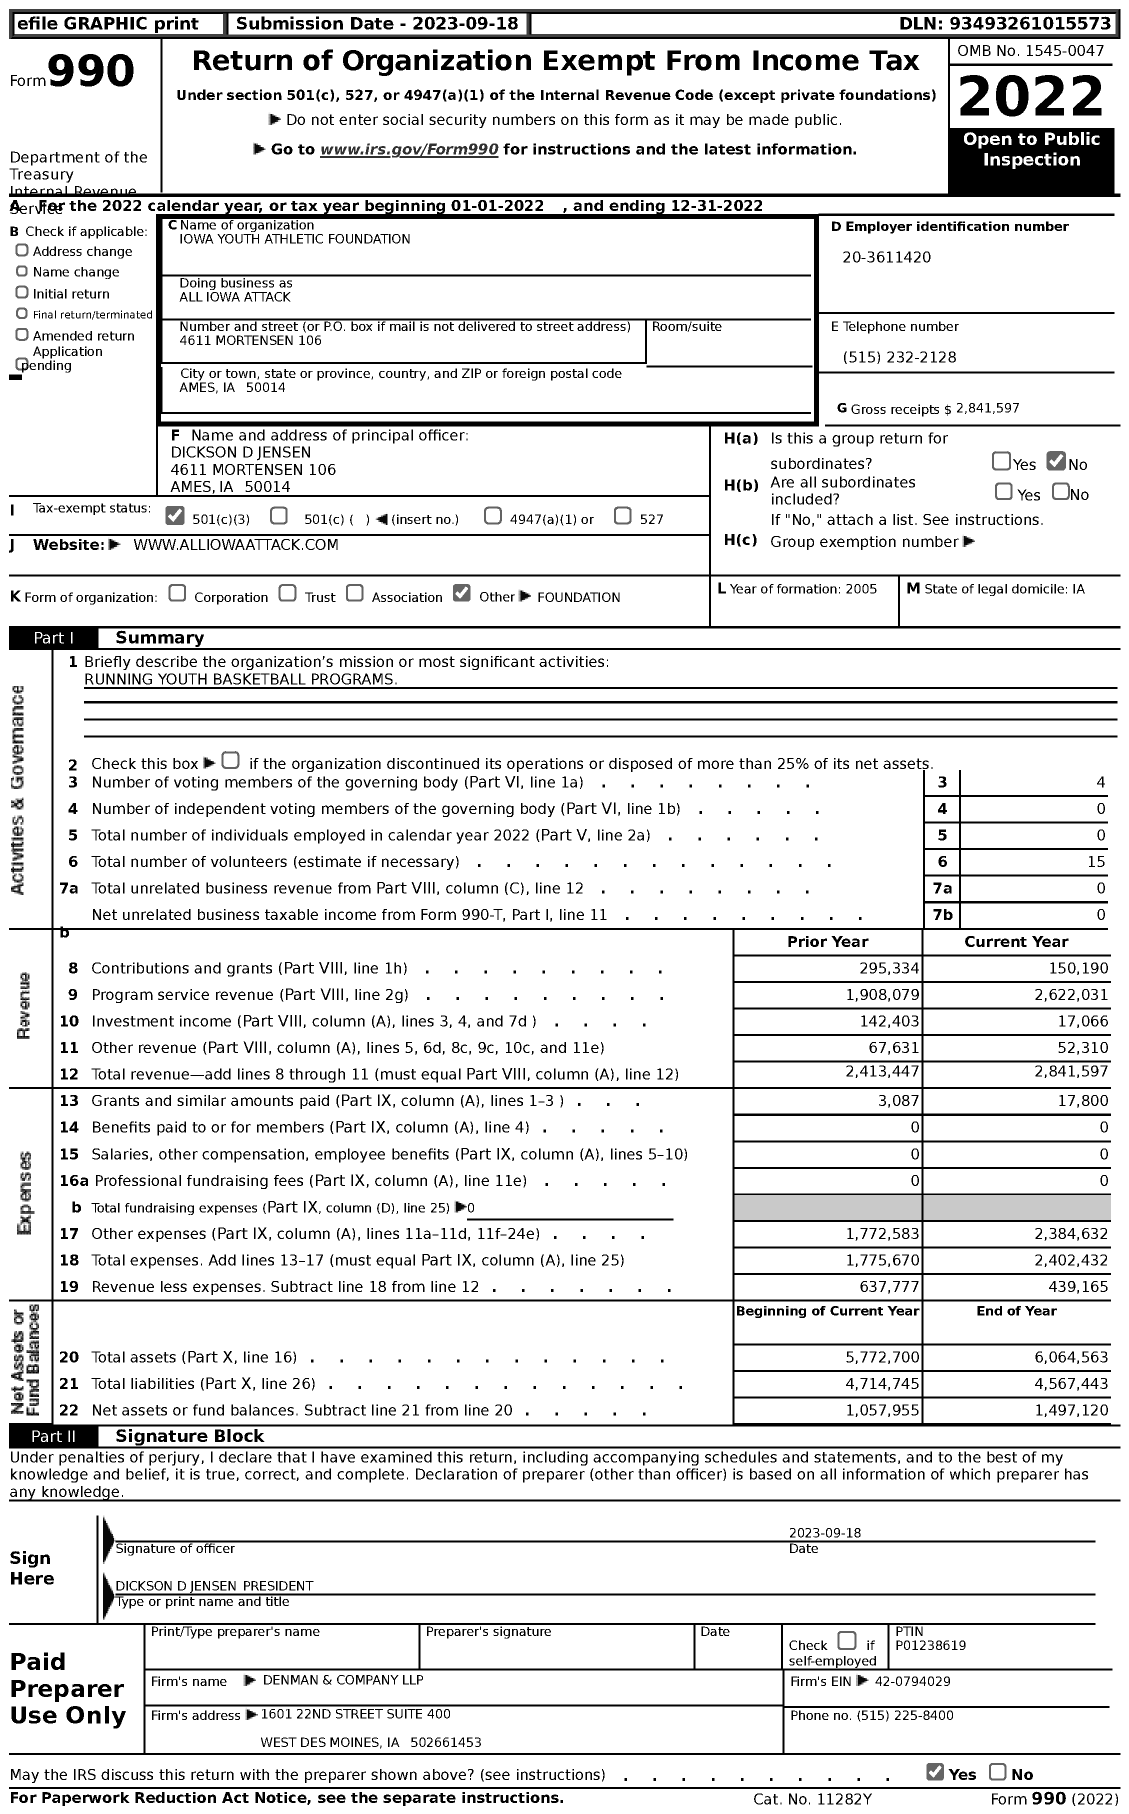 Image of first page of 2022 Form 990 for All Iowa Attack